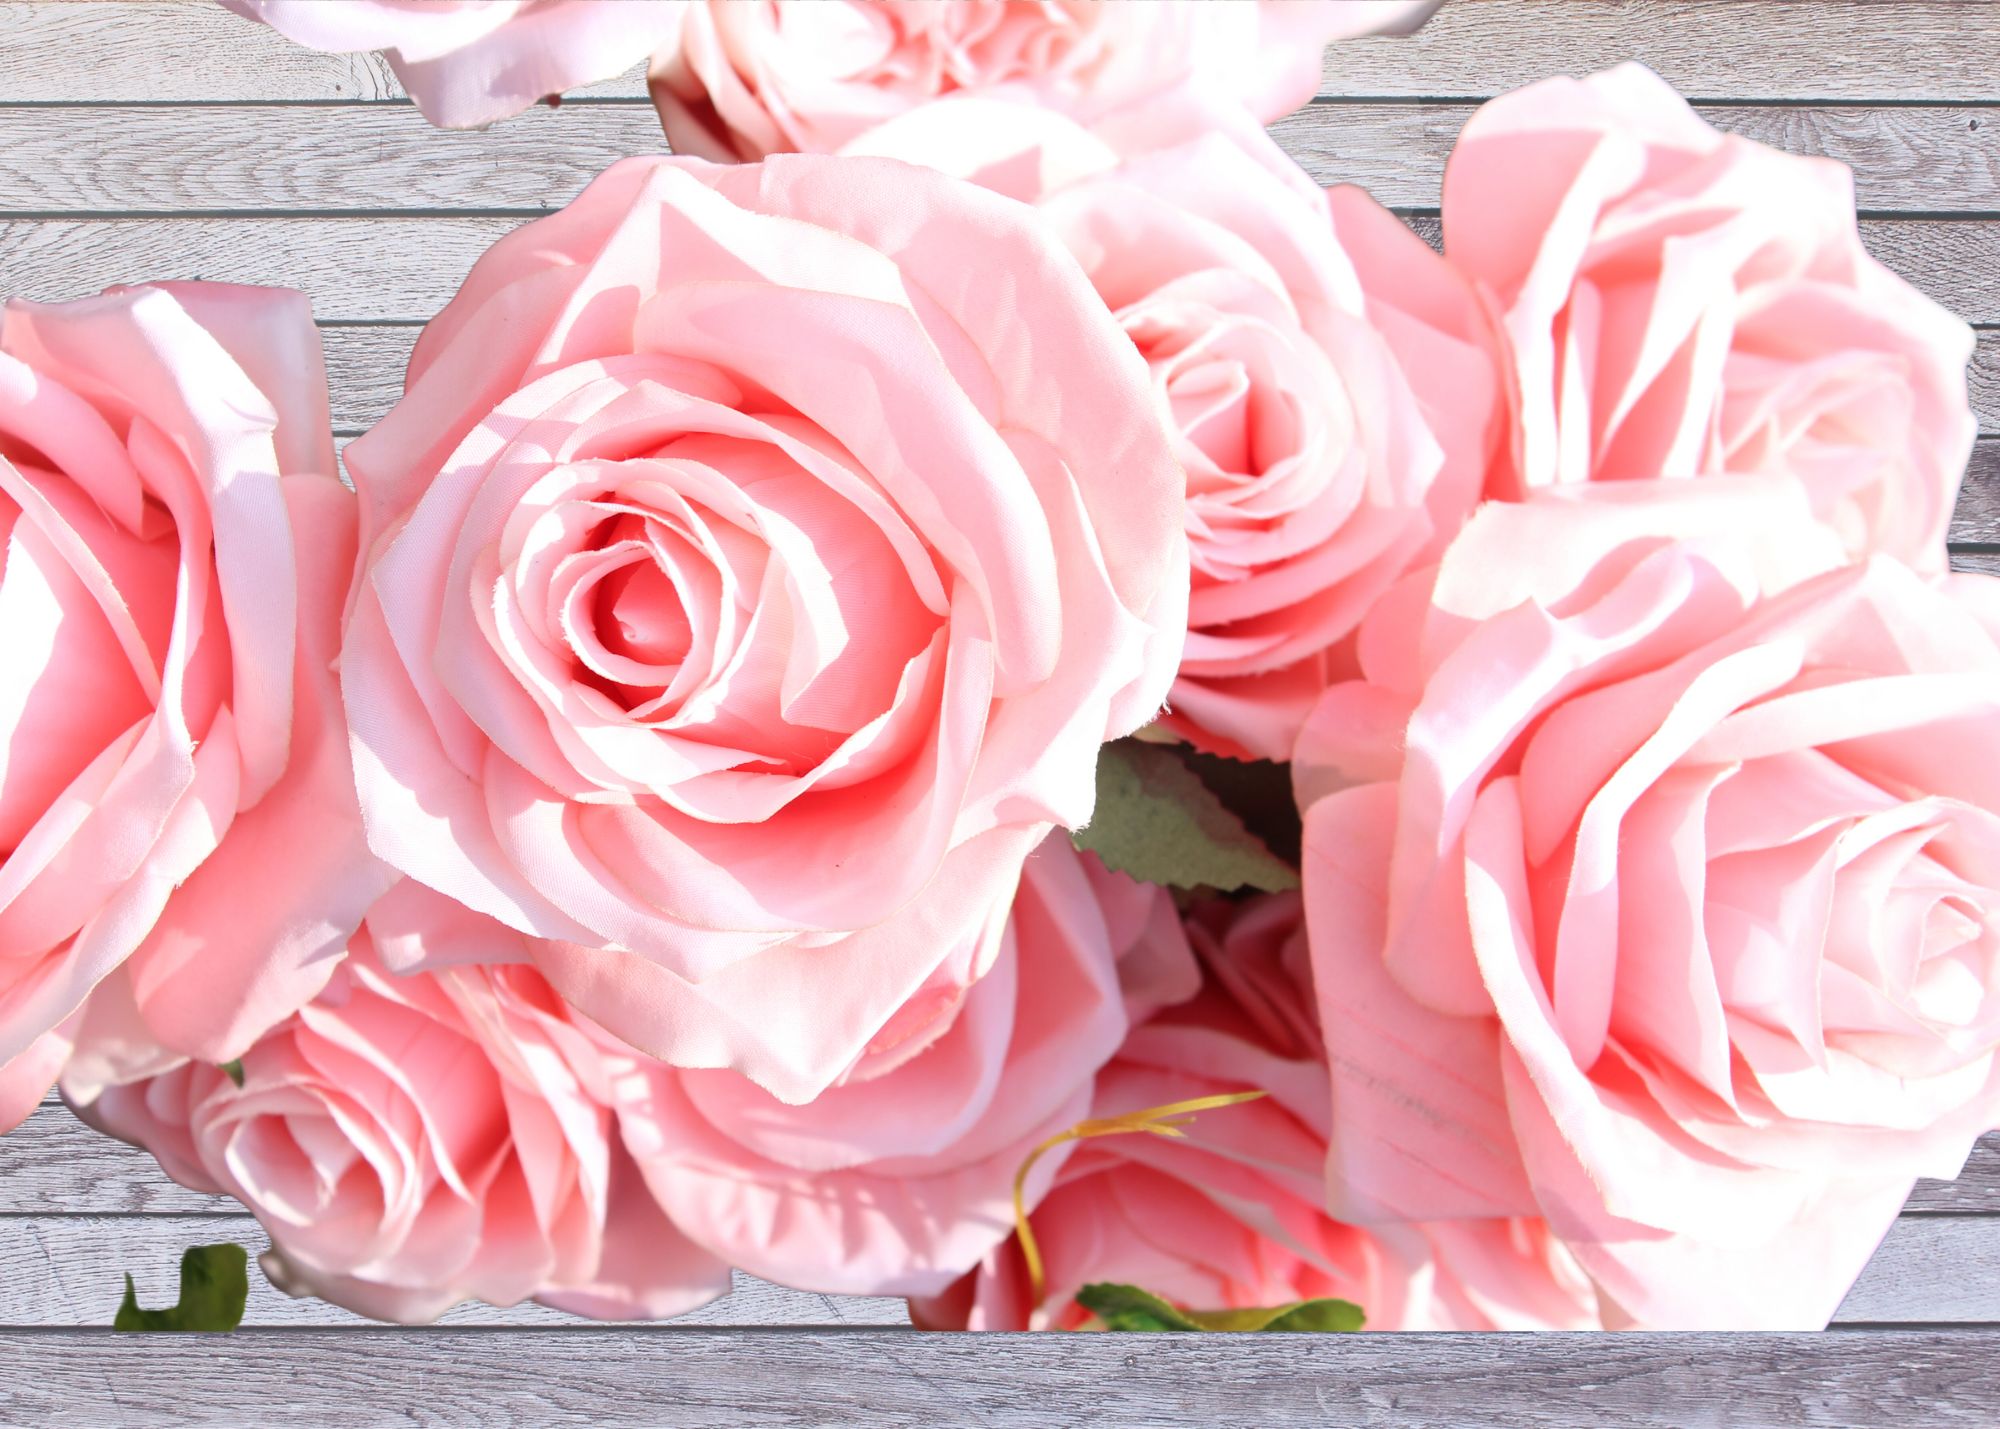 A picture of pink roses